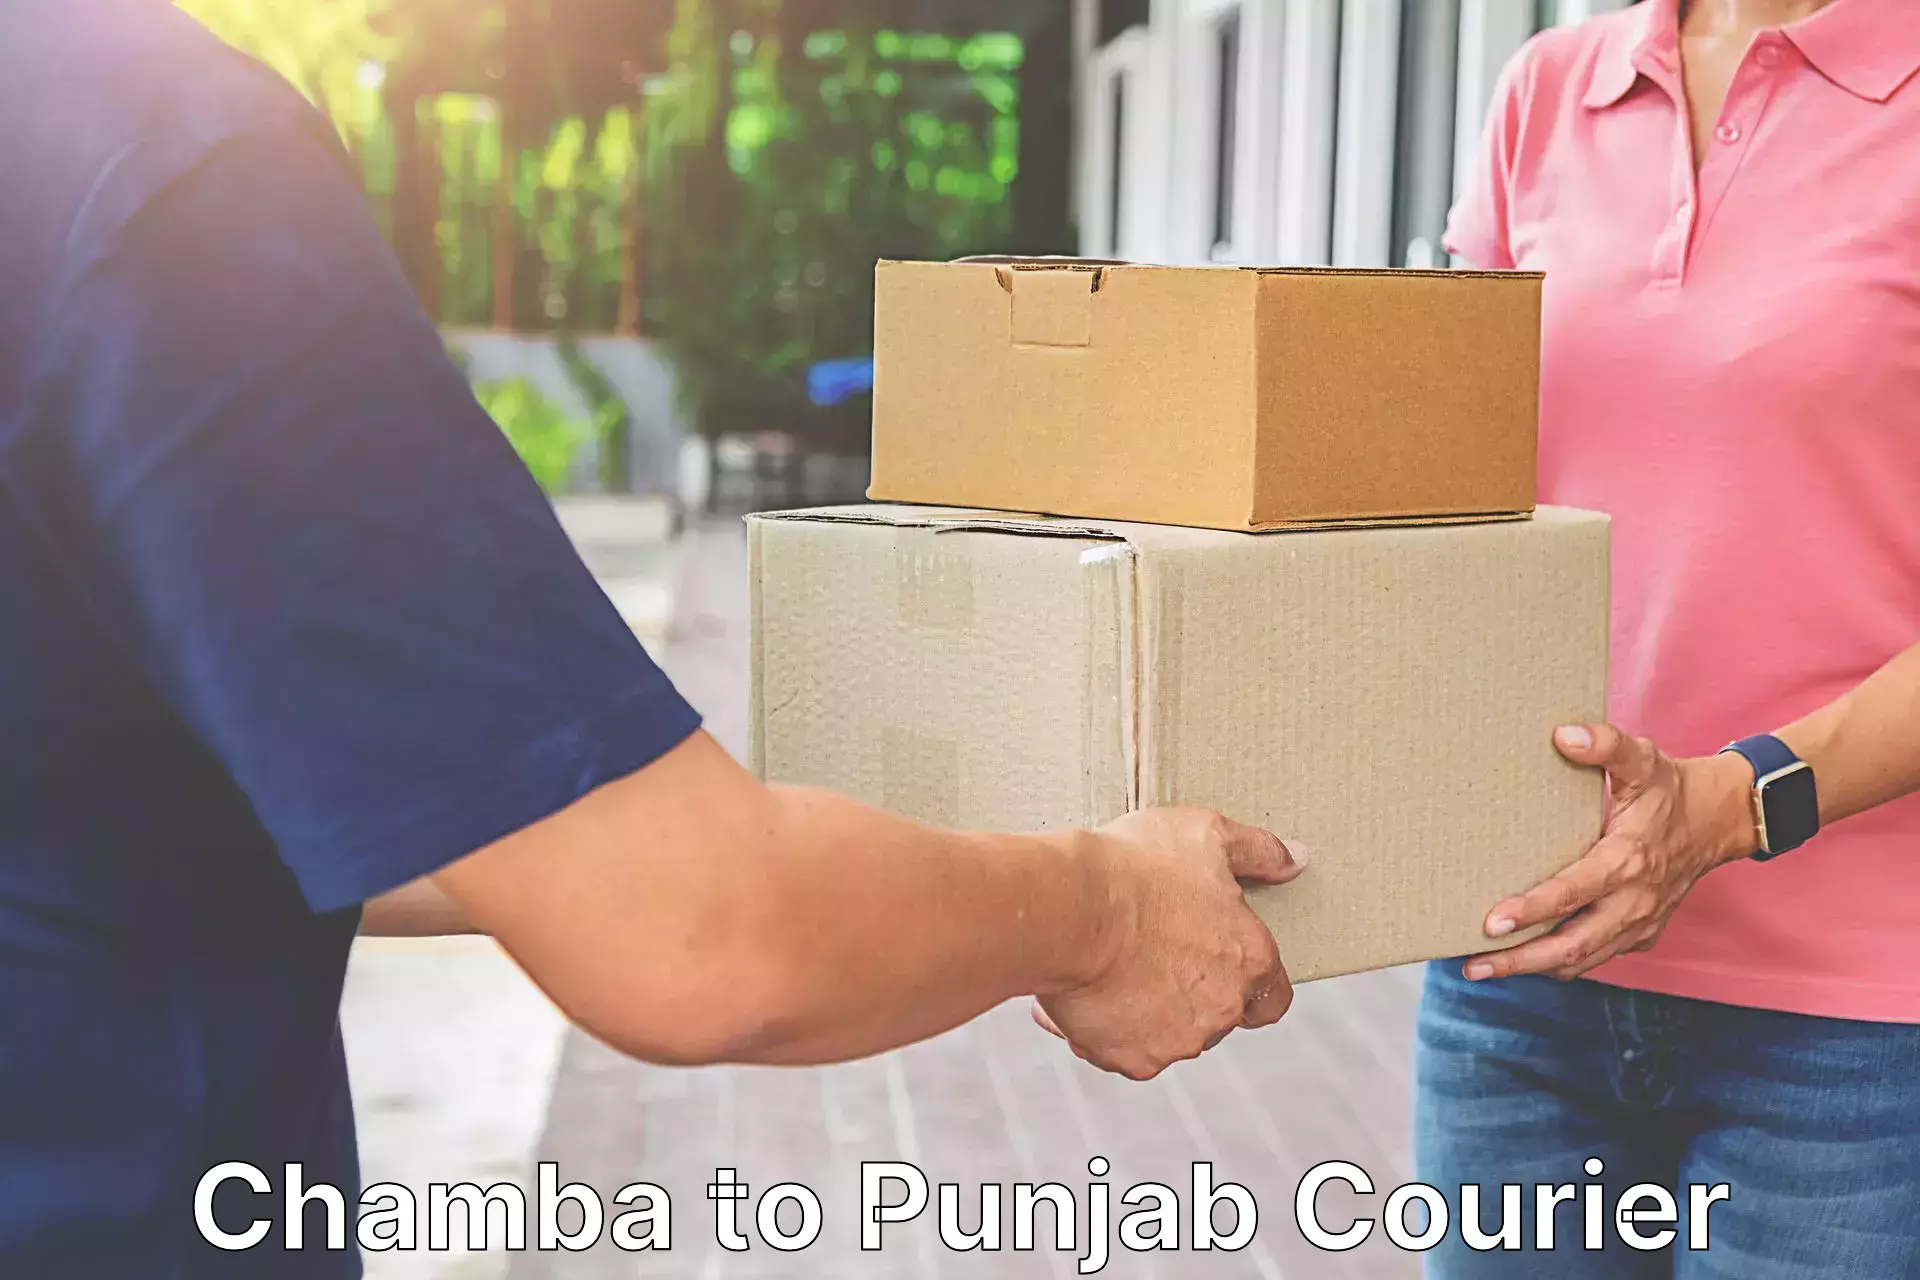 Efficient parcel delivery Chamba to Punjab